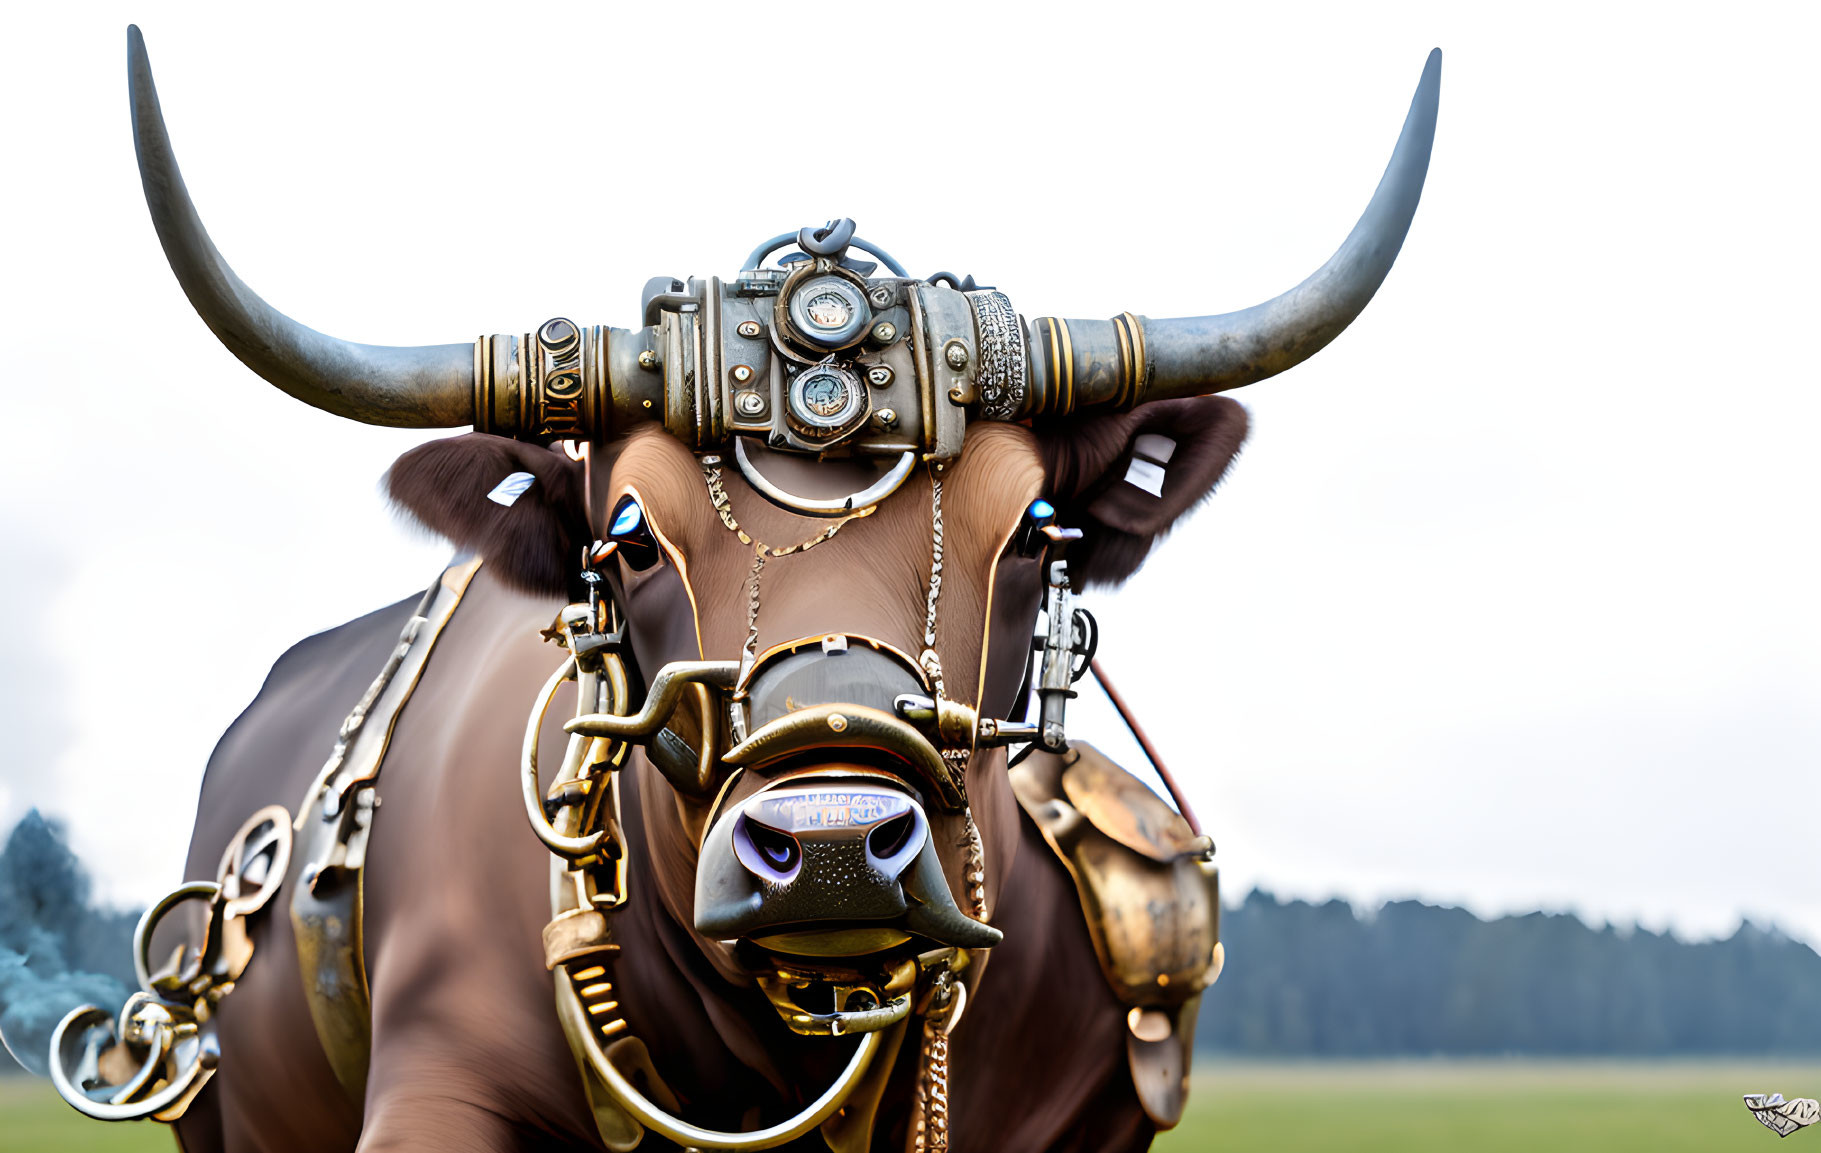 Intricate steam-punk style bull with mechanical headgear and brass accents against blurred background